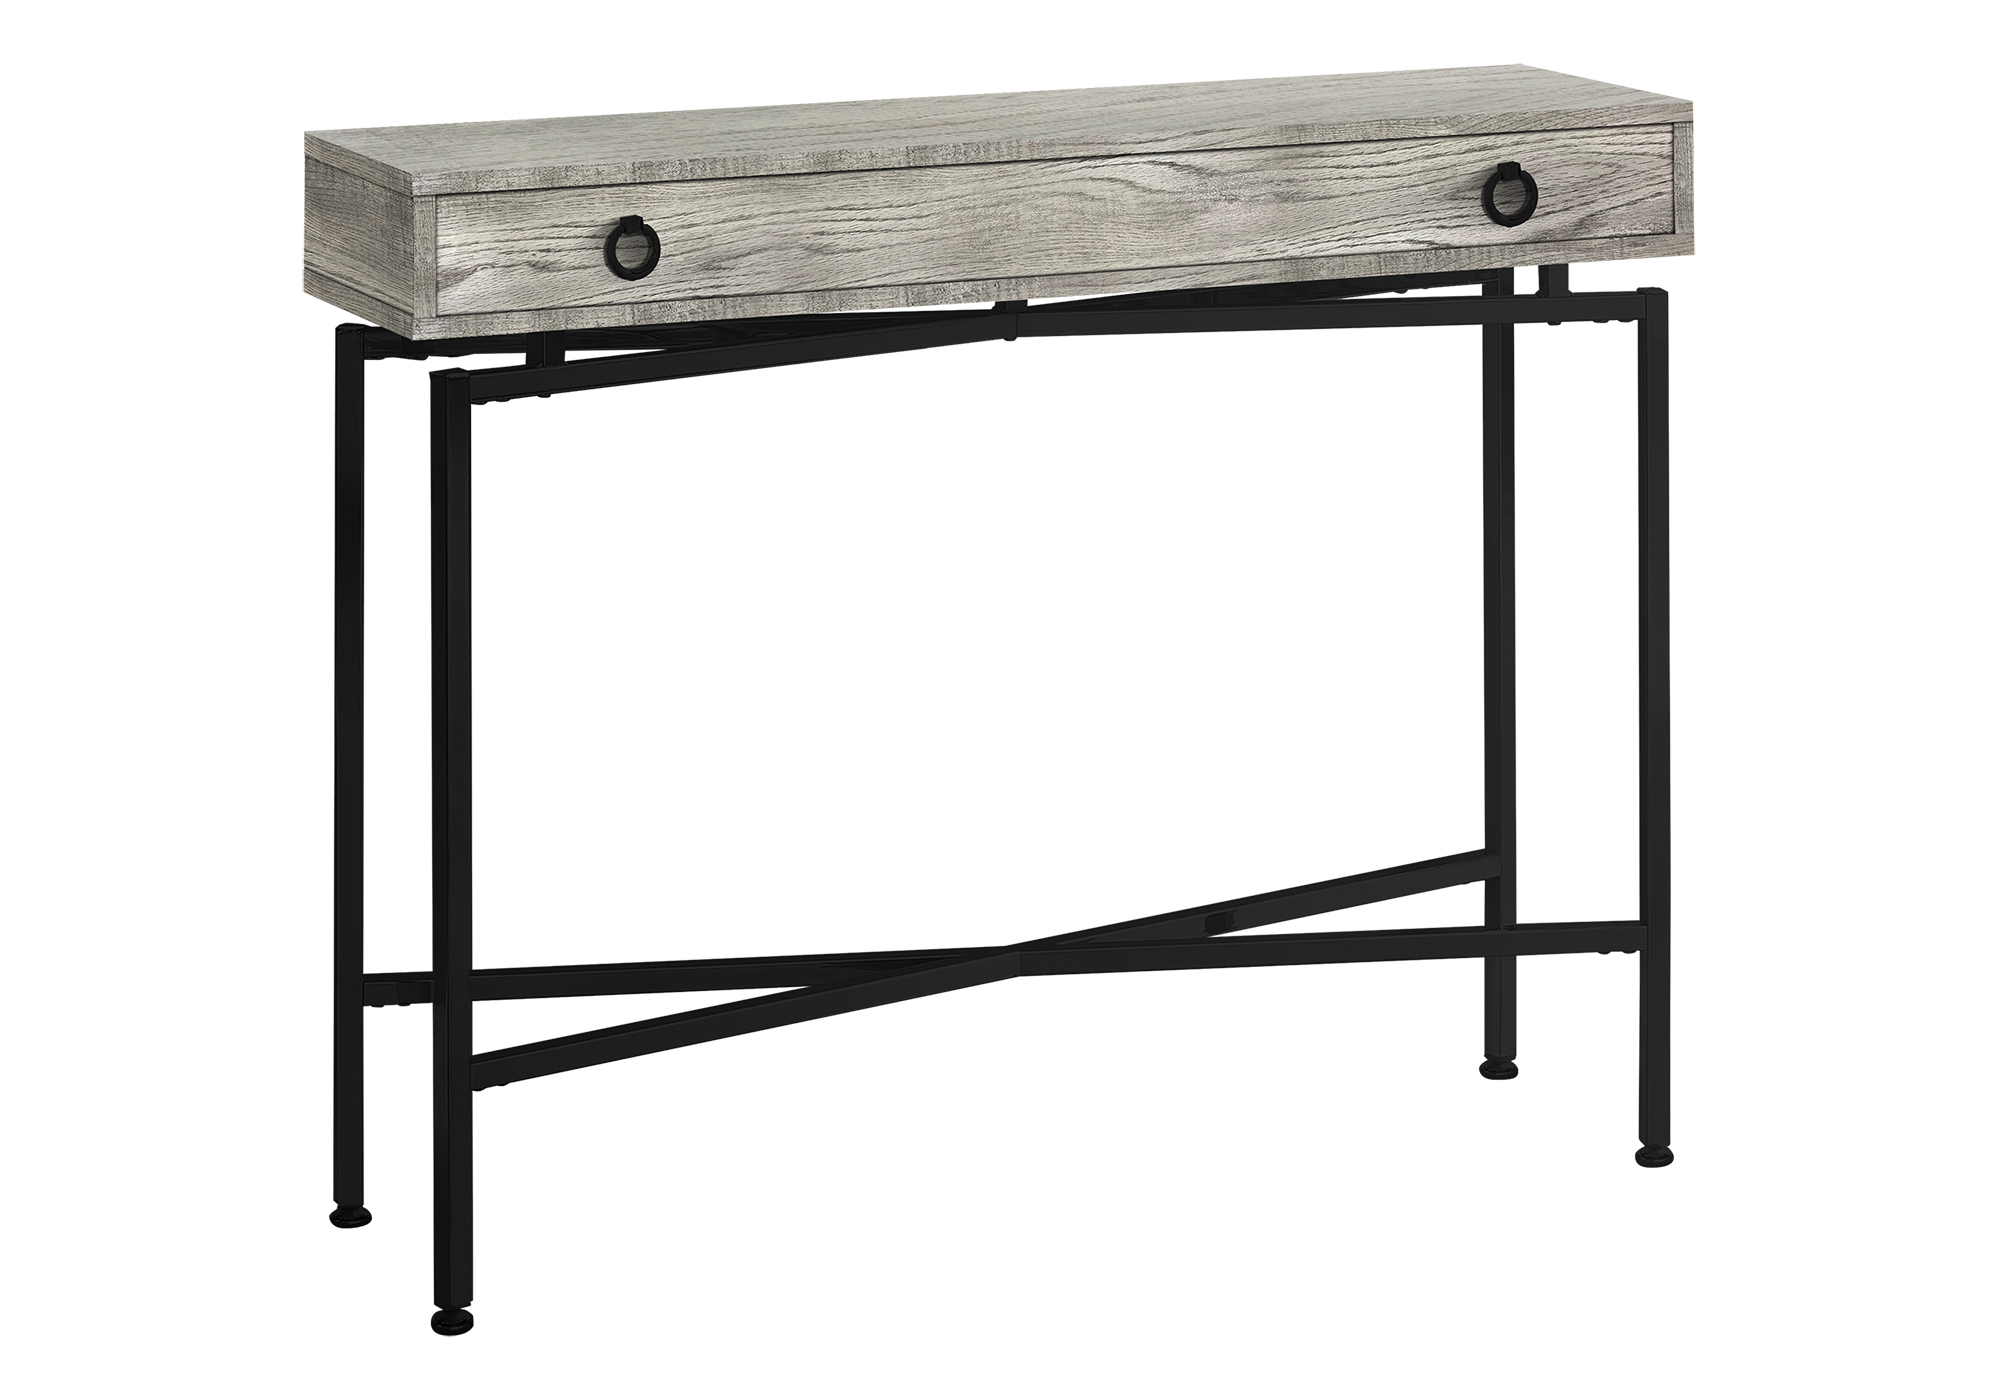 ACCENT TABLE - 42"L / GREY RECLAIMED WOOD / BLACK CONSOLE